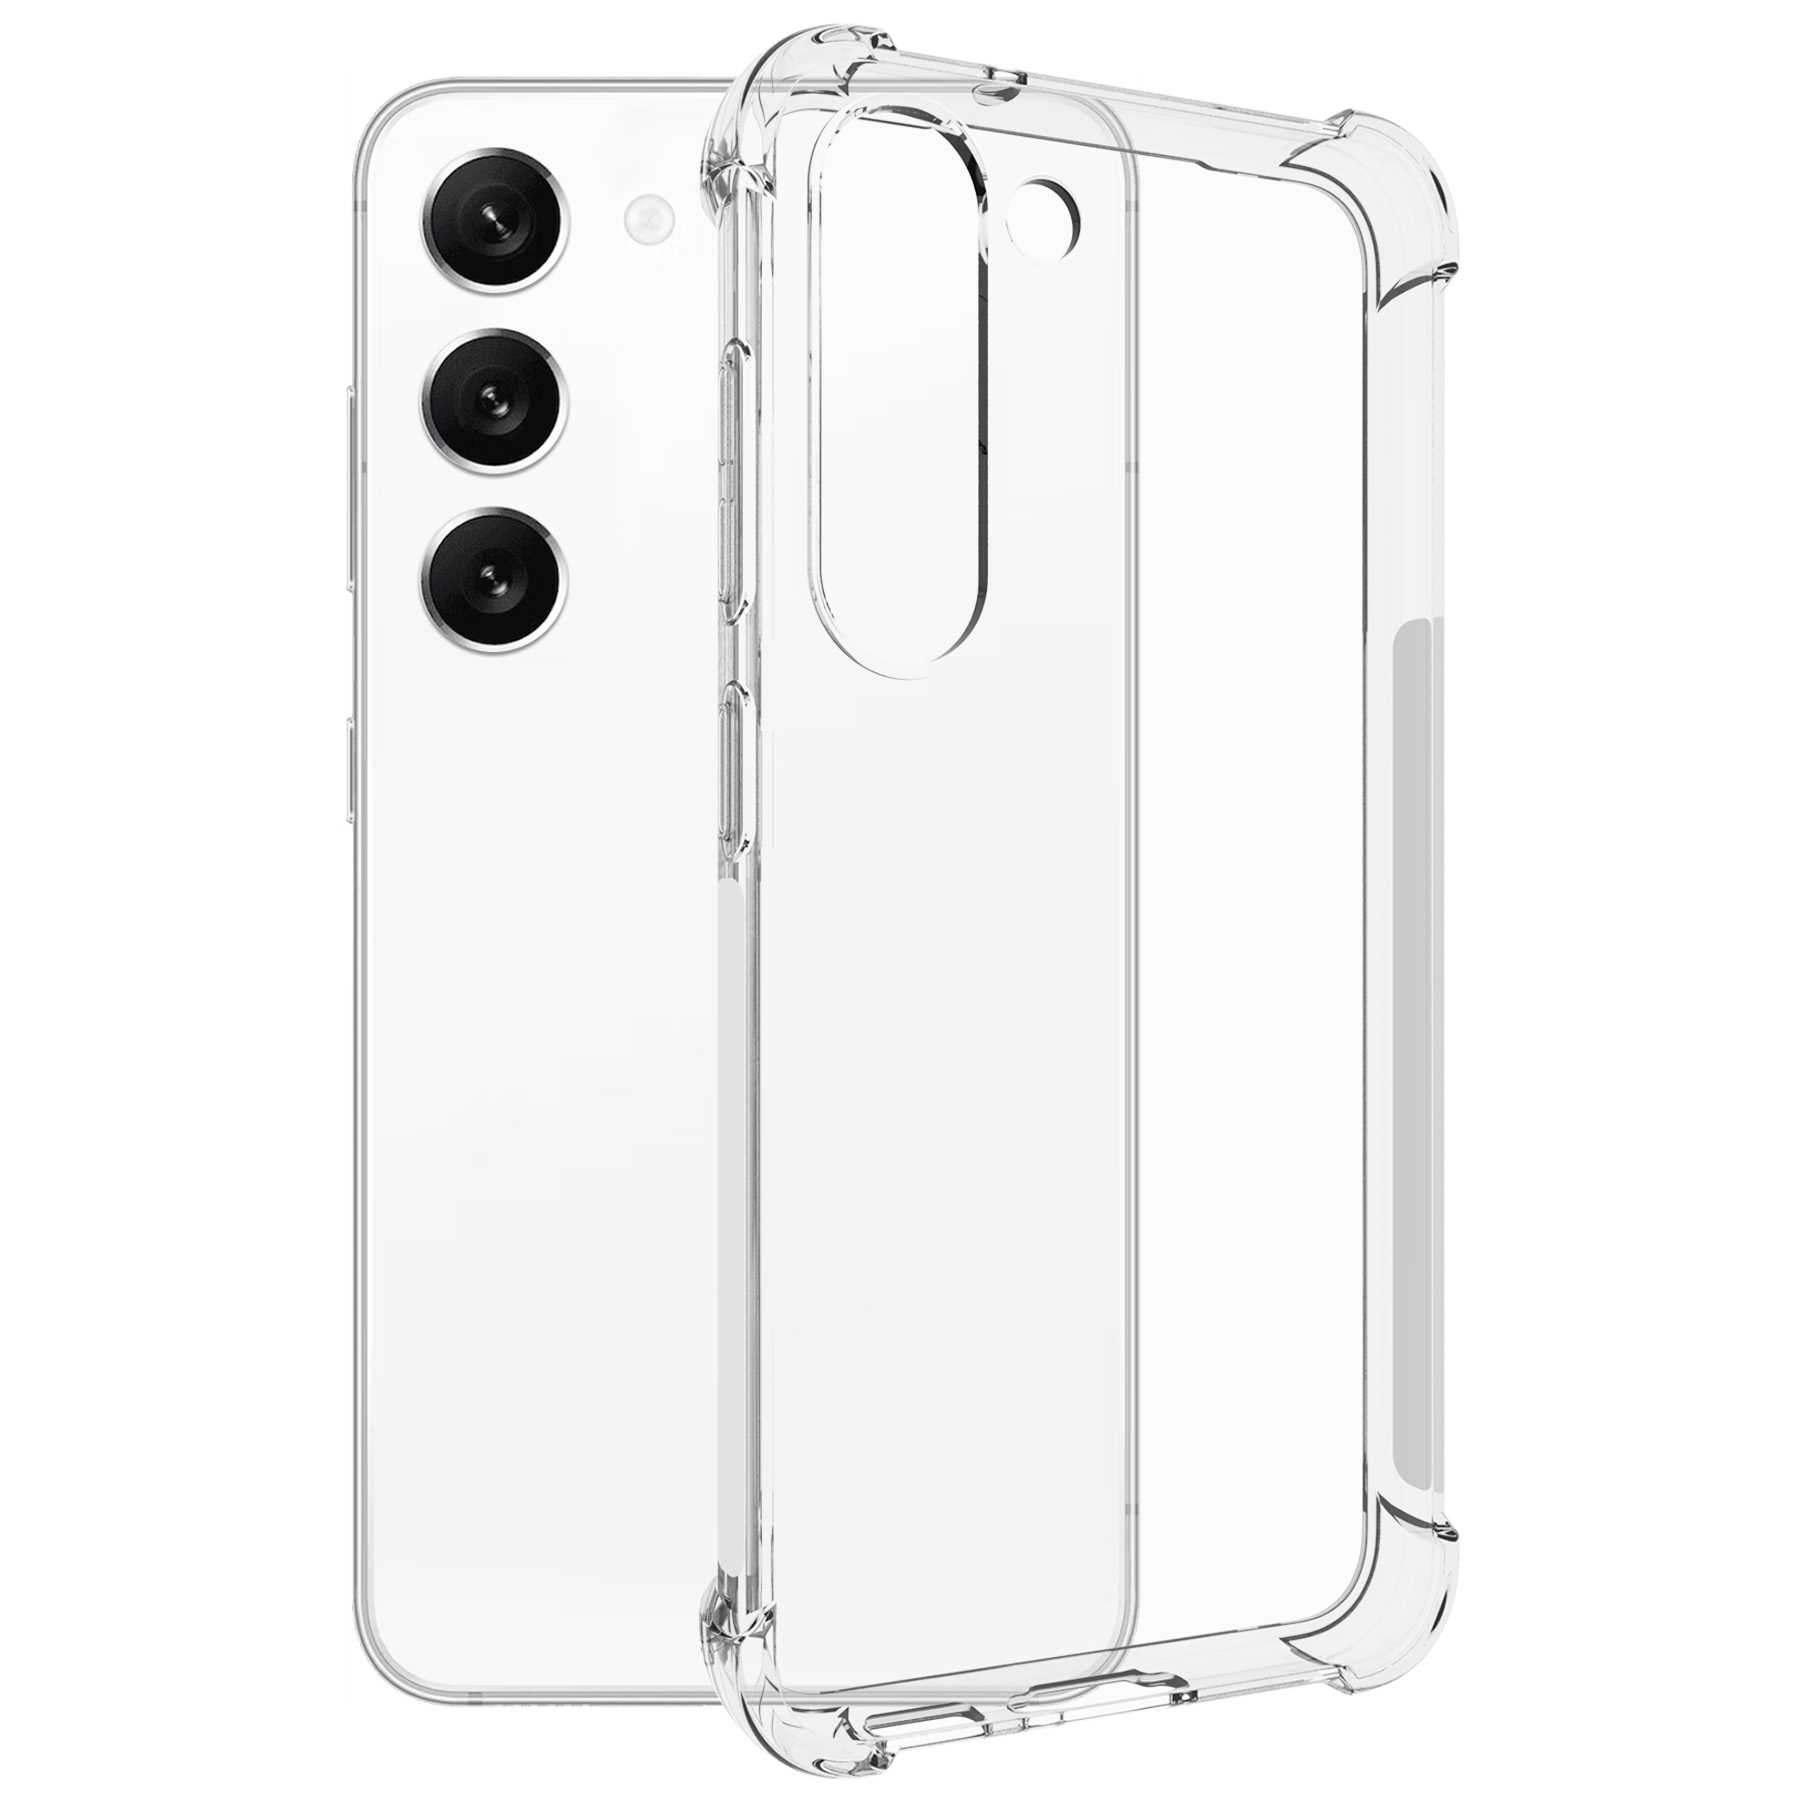 MORE S23 ENERGY Transparent Clear Samsung, MTB Galaxy Case, Plus, Armor Backcover,